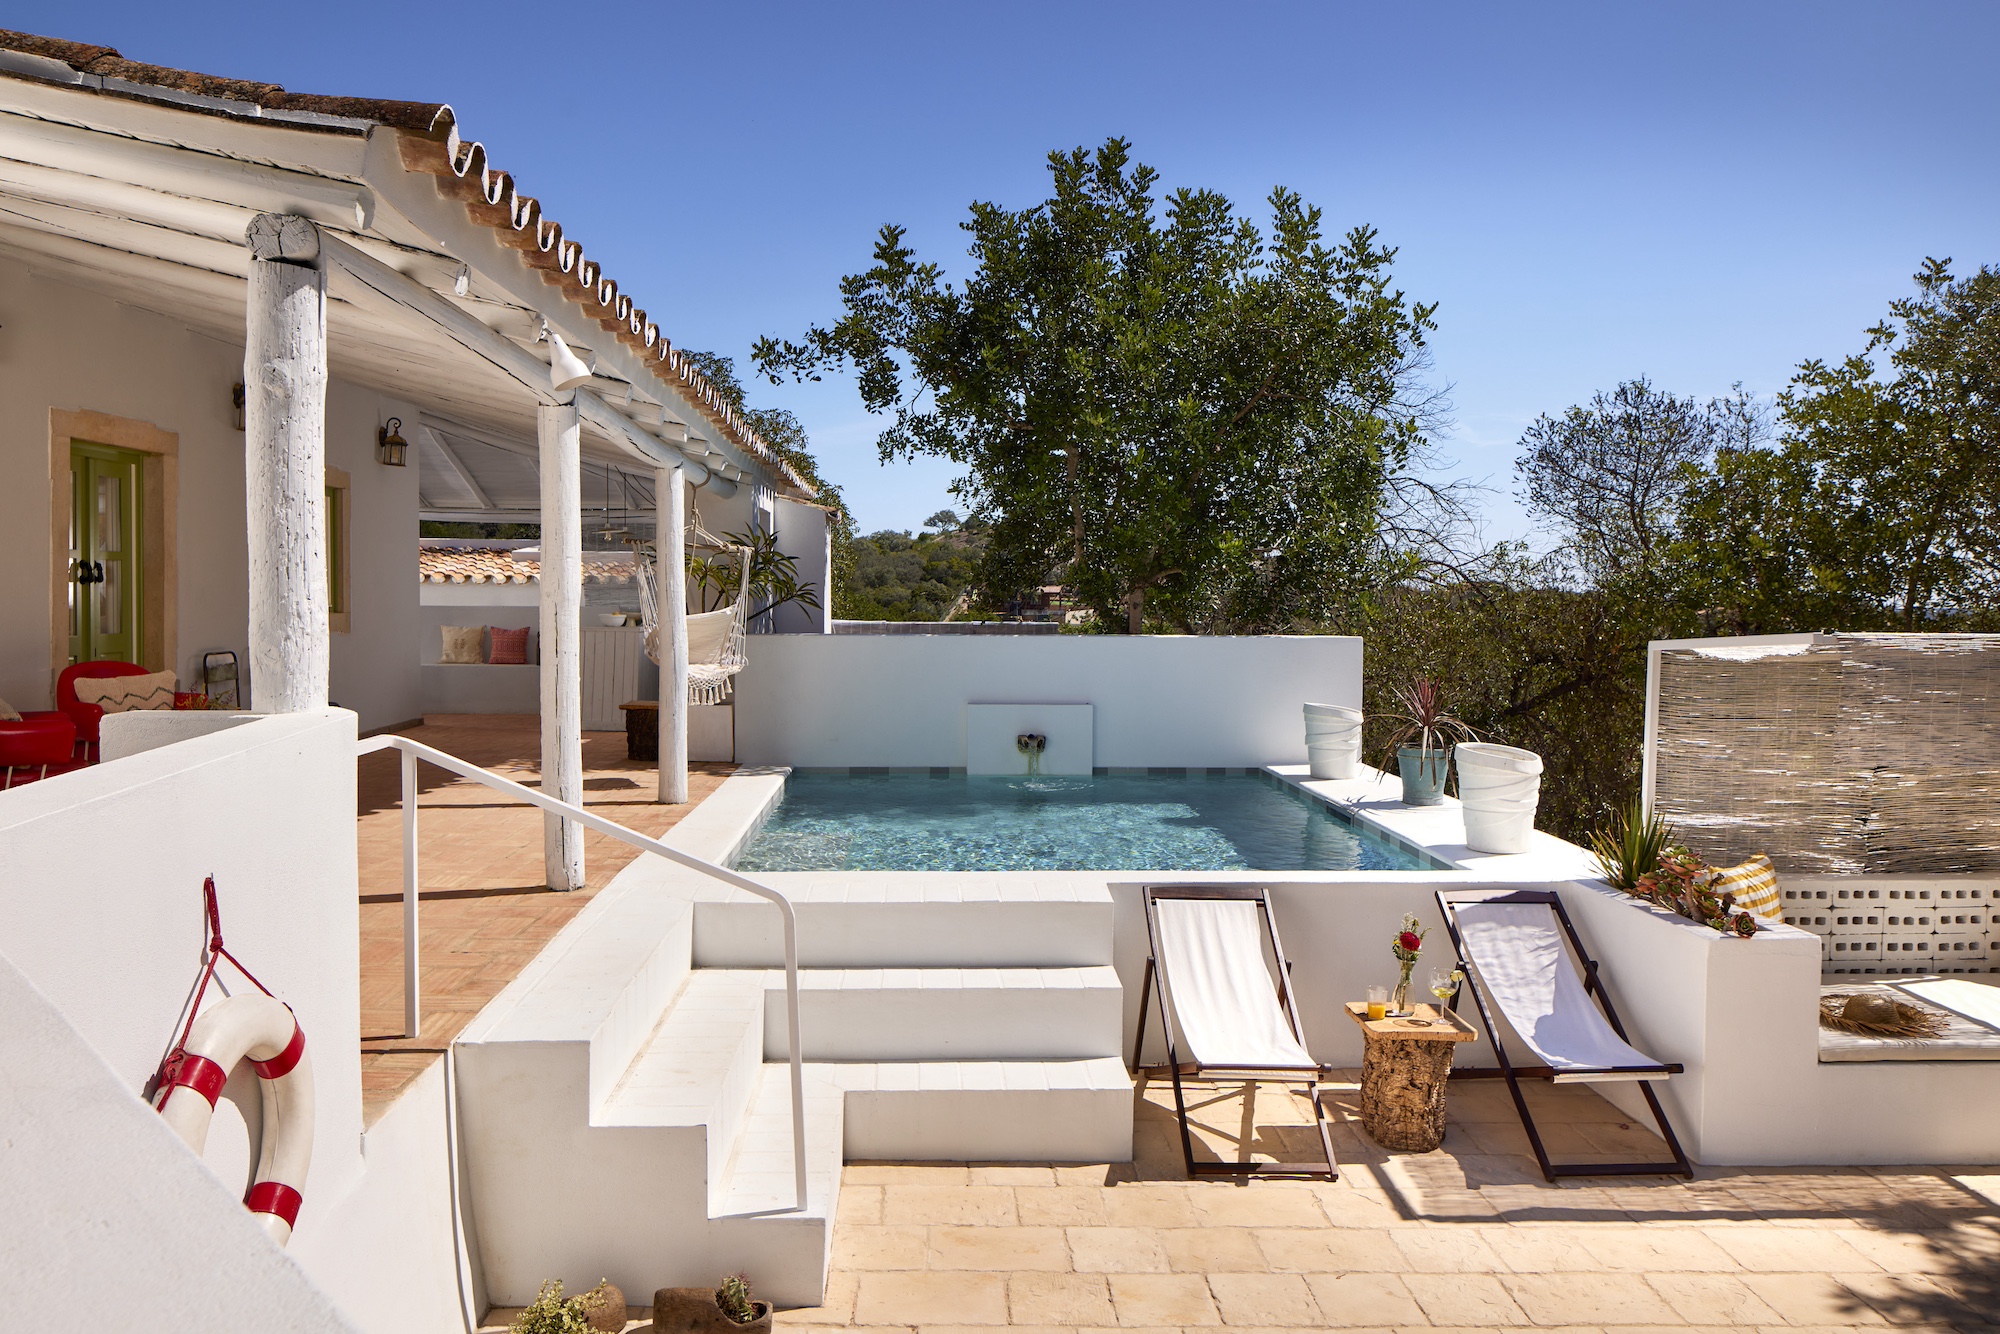 Win An Exclusive Stay With Welcome Beyond For Four Guests At Casa São Braz In Portugal's Algarve